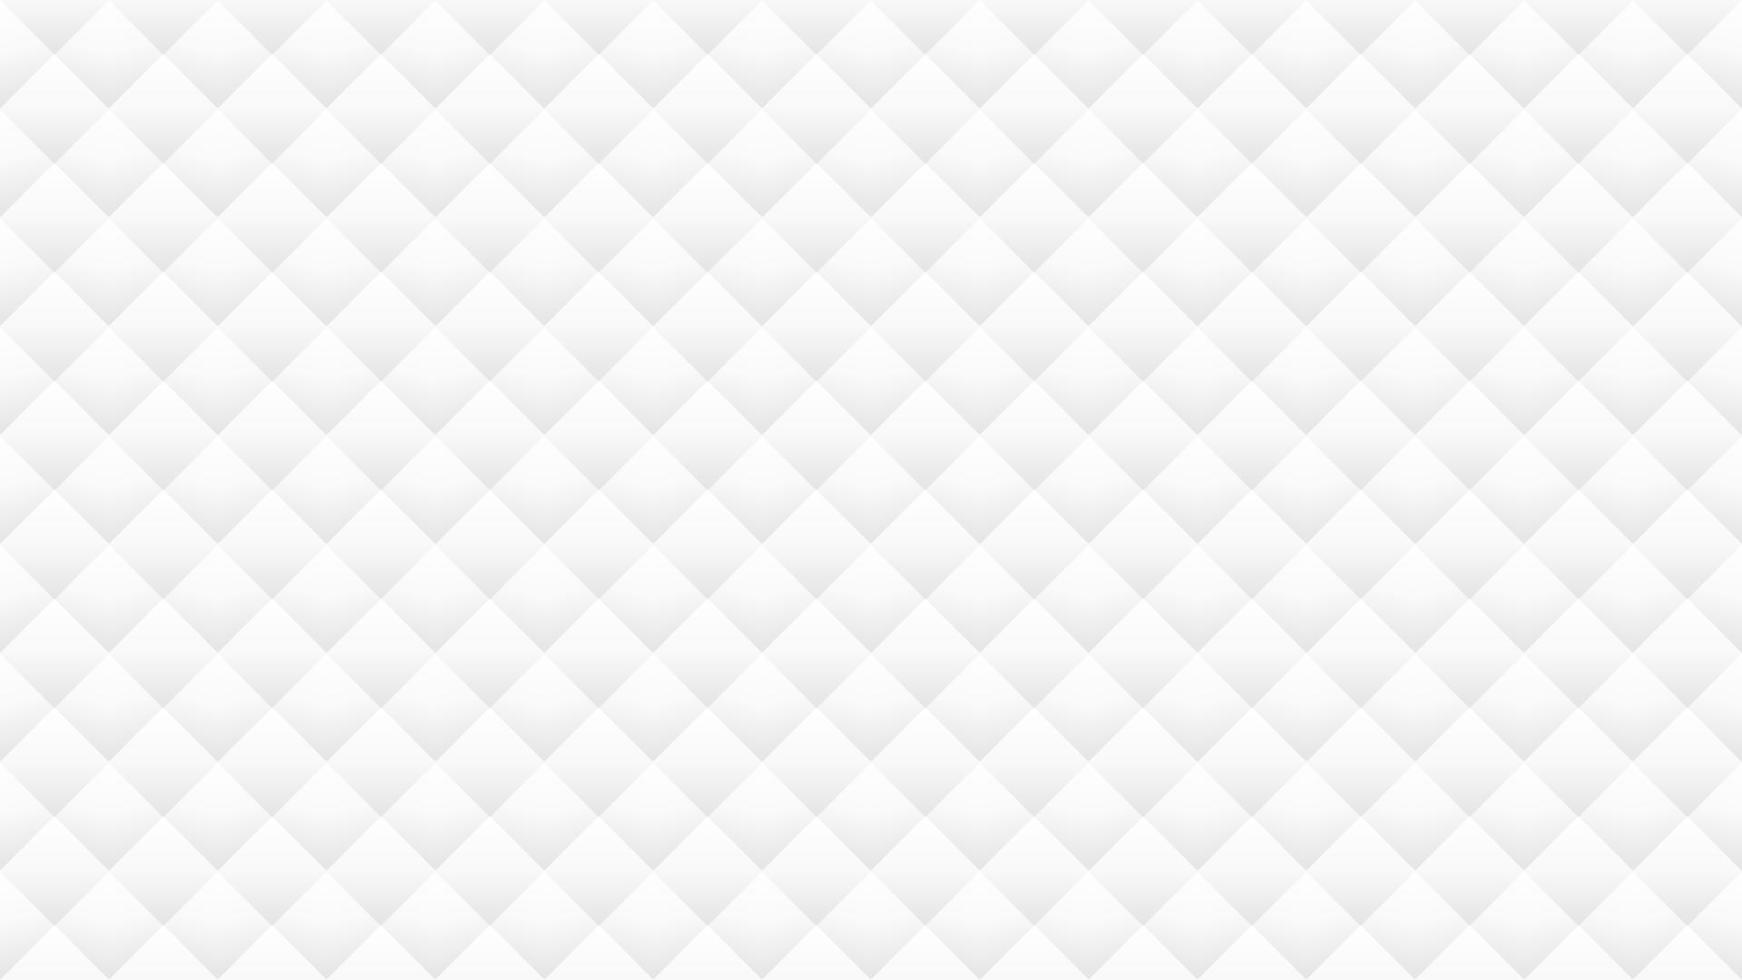 White and gray geometric shape seamless pattern background. Vector illustration